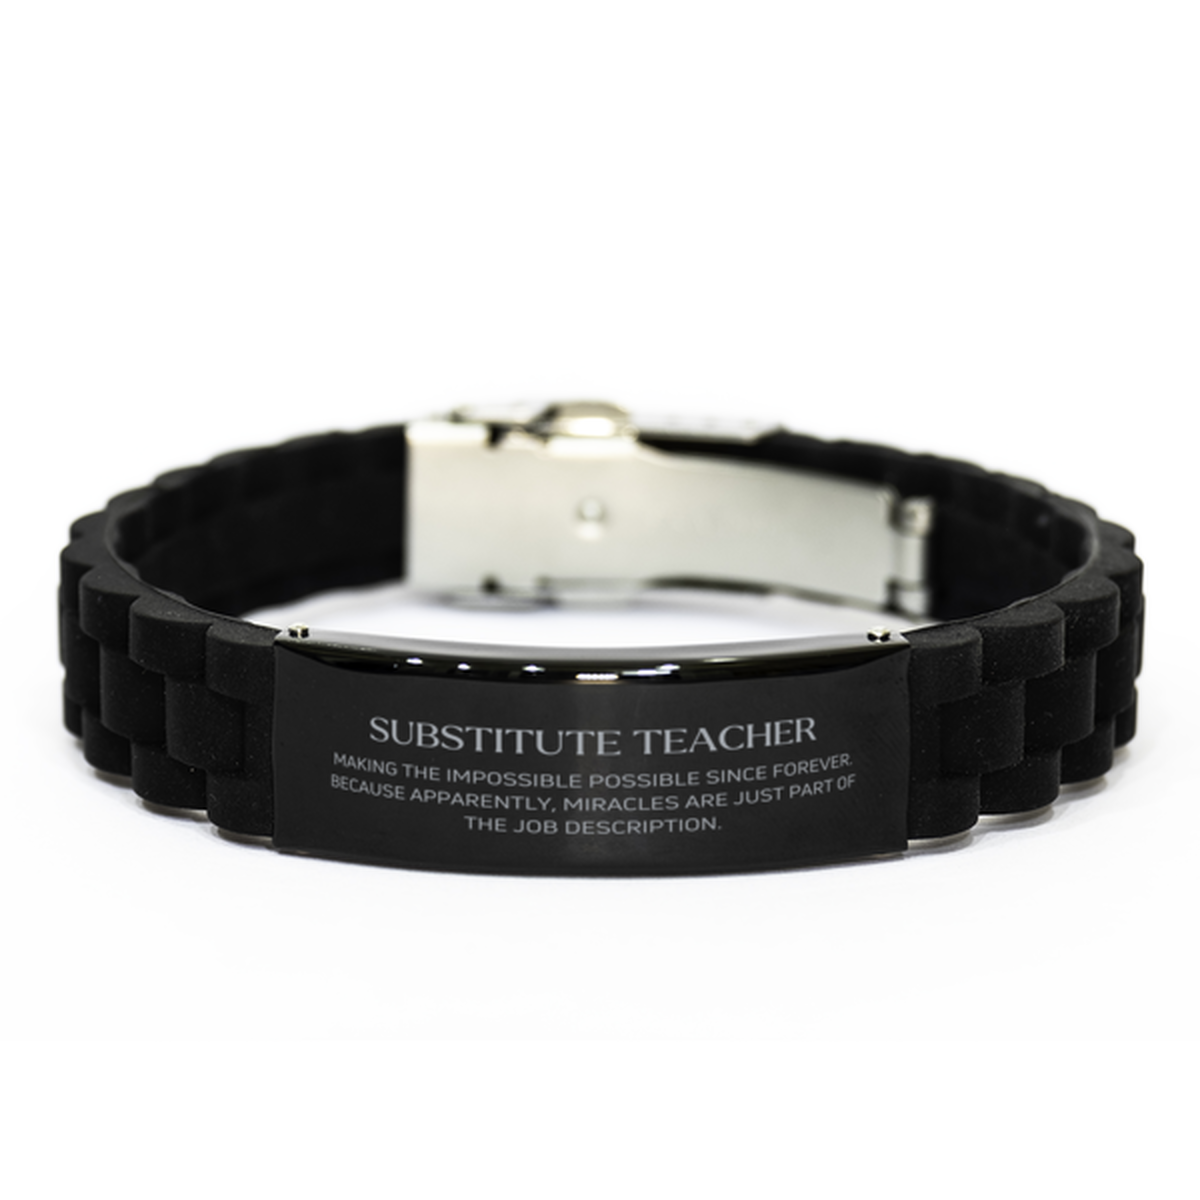 Funny Substitute Teacher Gifts, Miracles are just part of the job description, Inspirational Birthday Black Glidelock Clasp Bracelet For Substitute Teacher, Men, Women, Coworkers, Friends, Boss